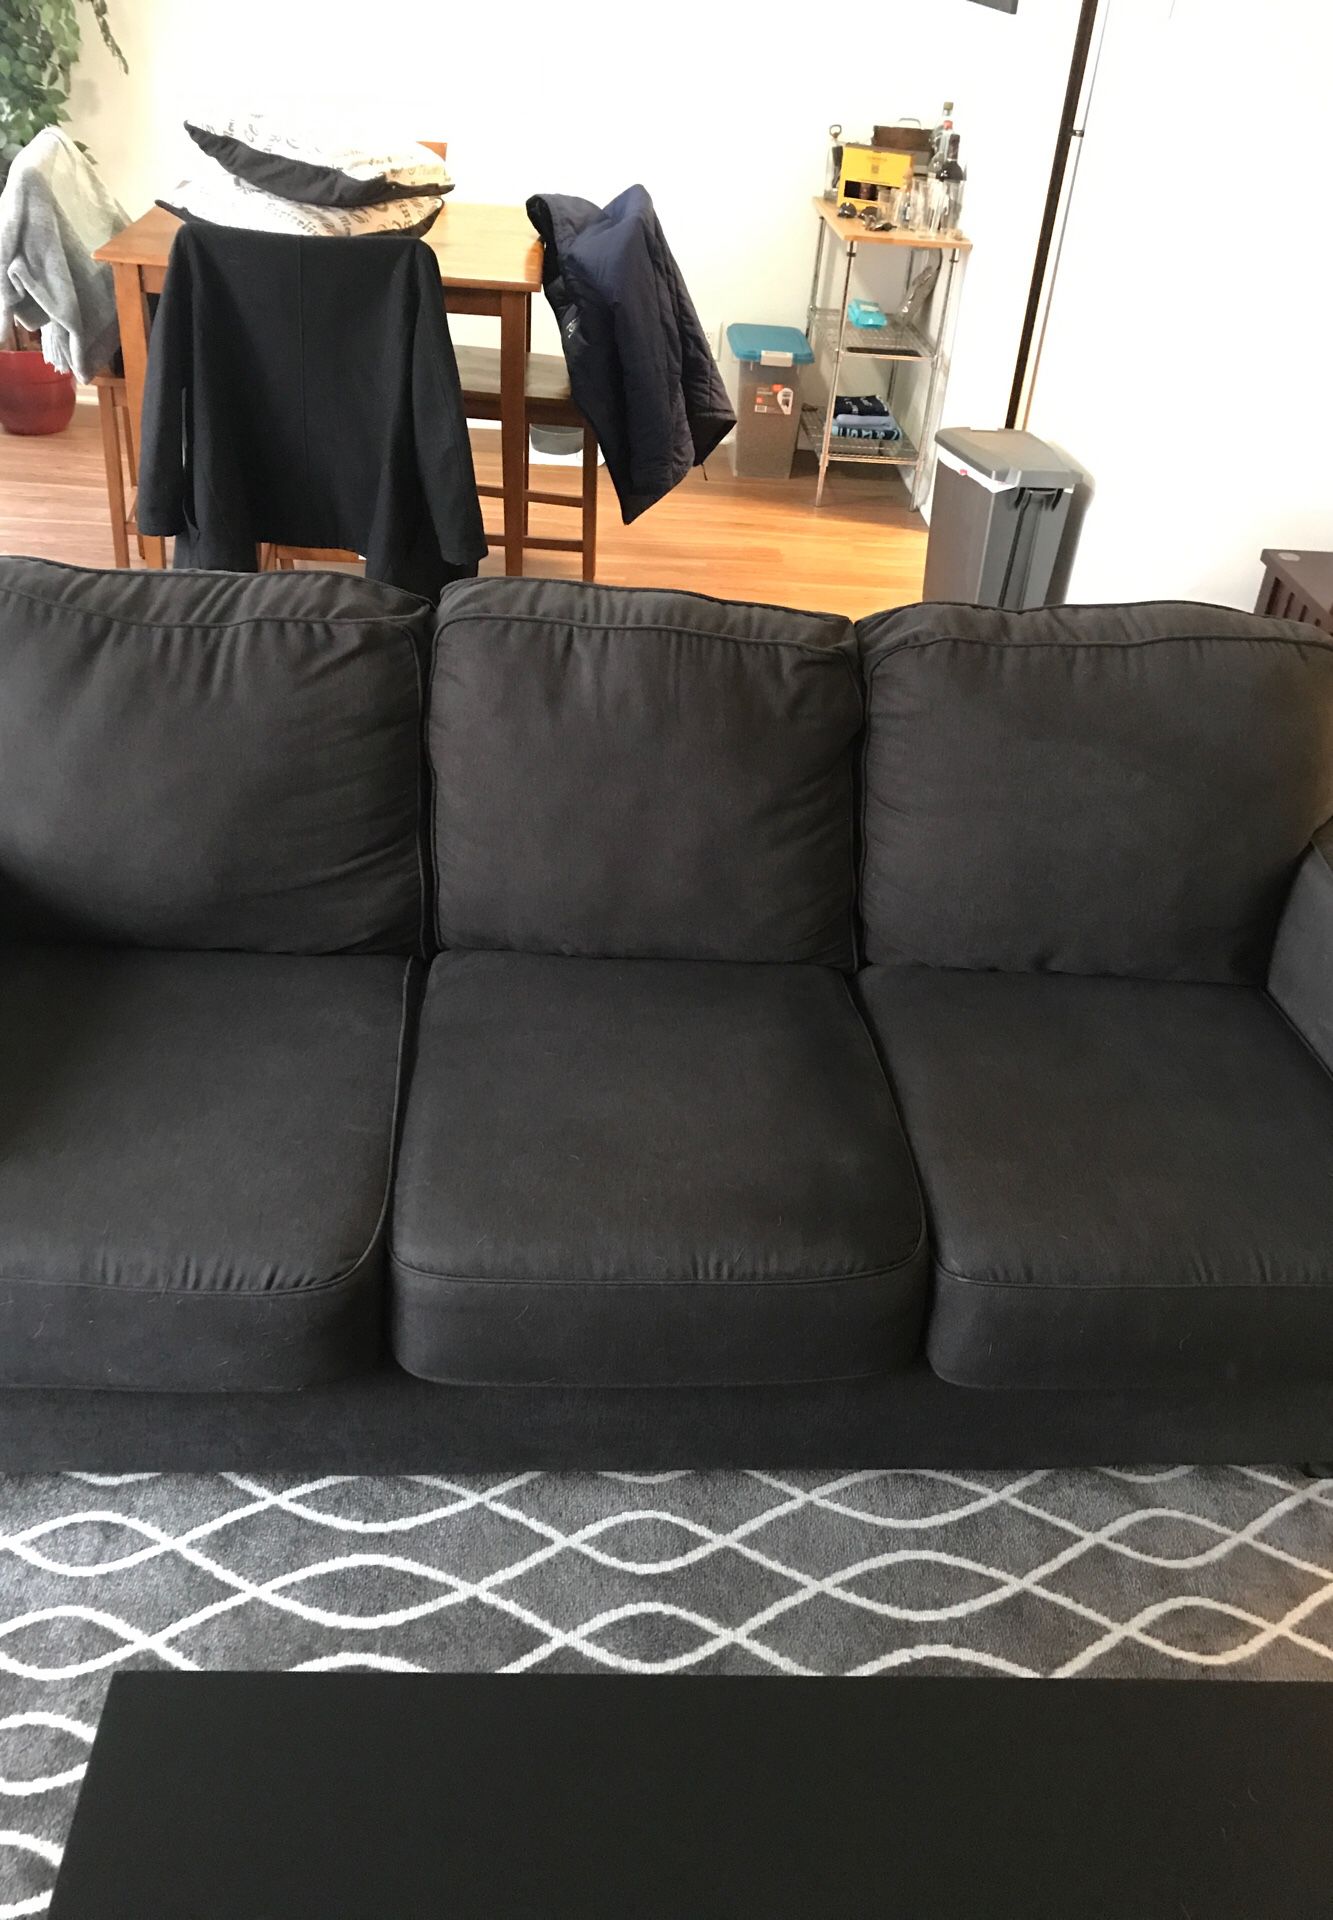 Charcoal Couch